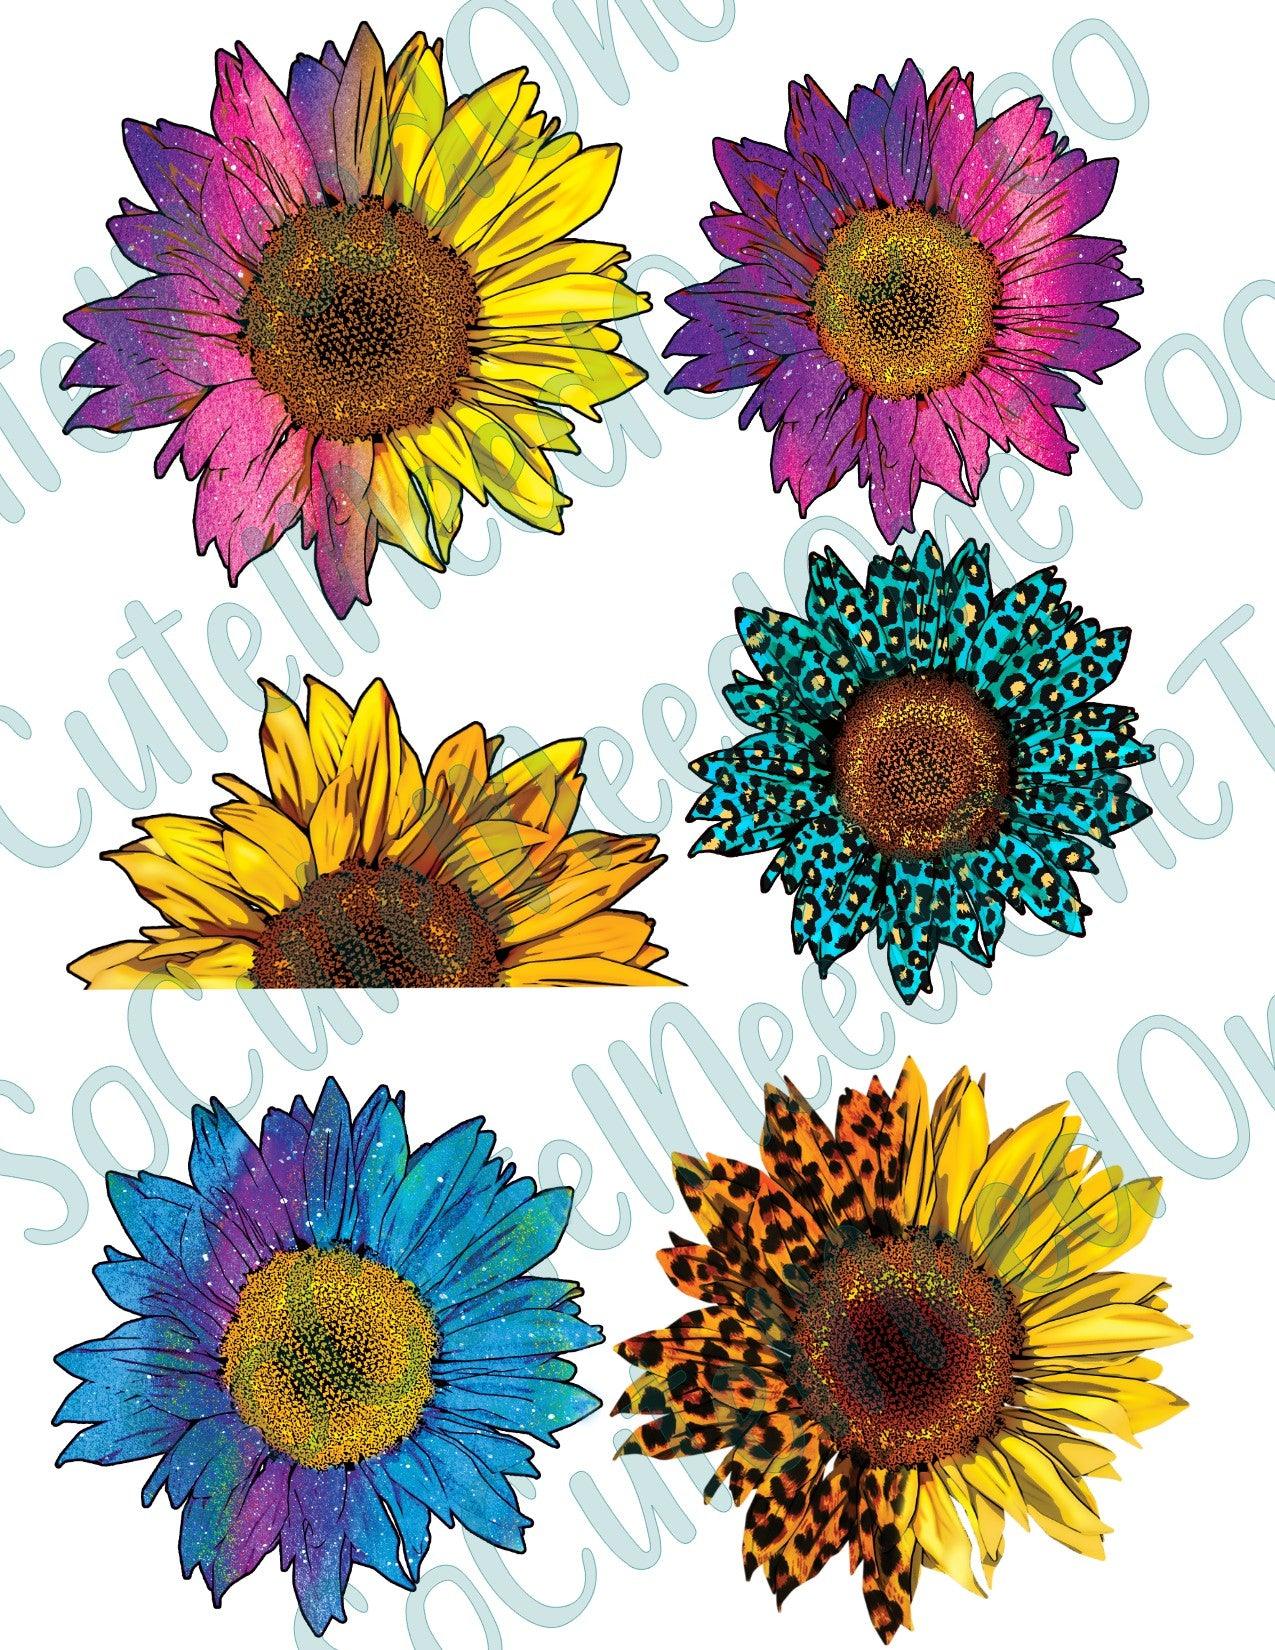 Sunflowers #3 On Clear Water Slide Paper Sealed and Ready To Use - SoCuteINeedOneToo